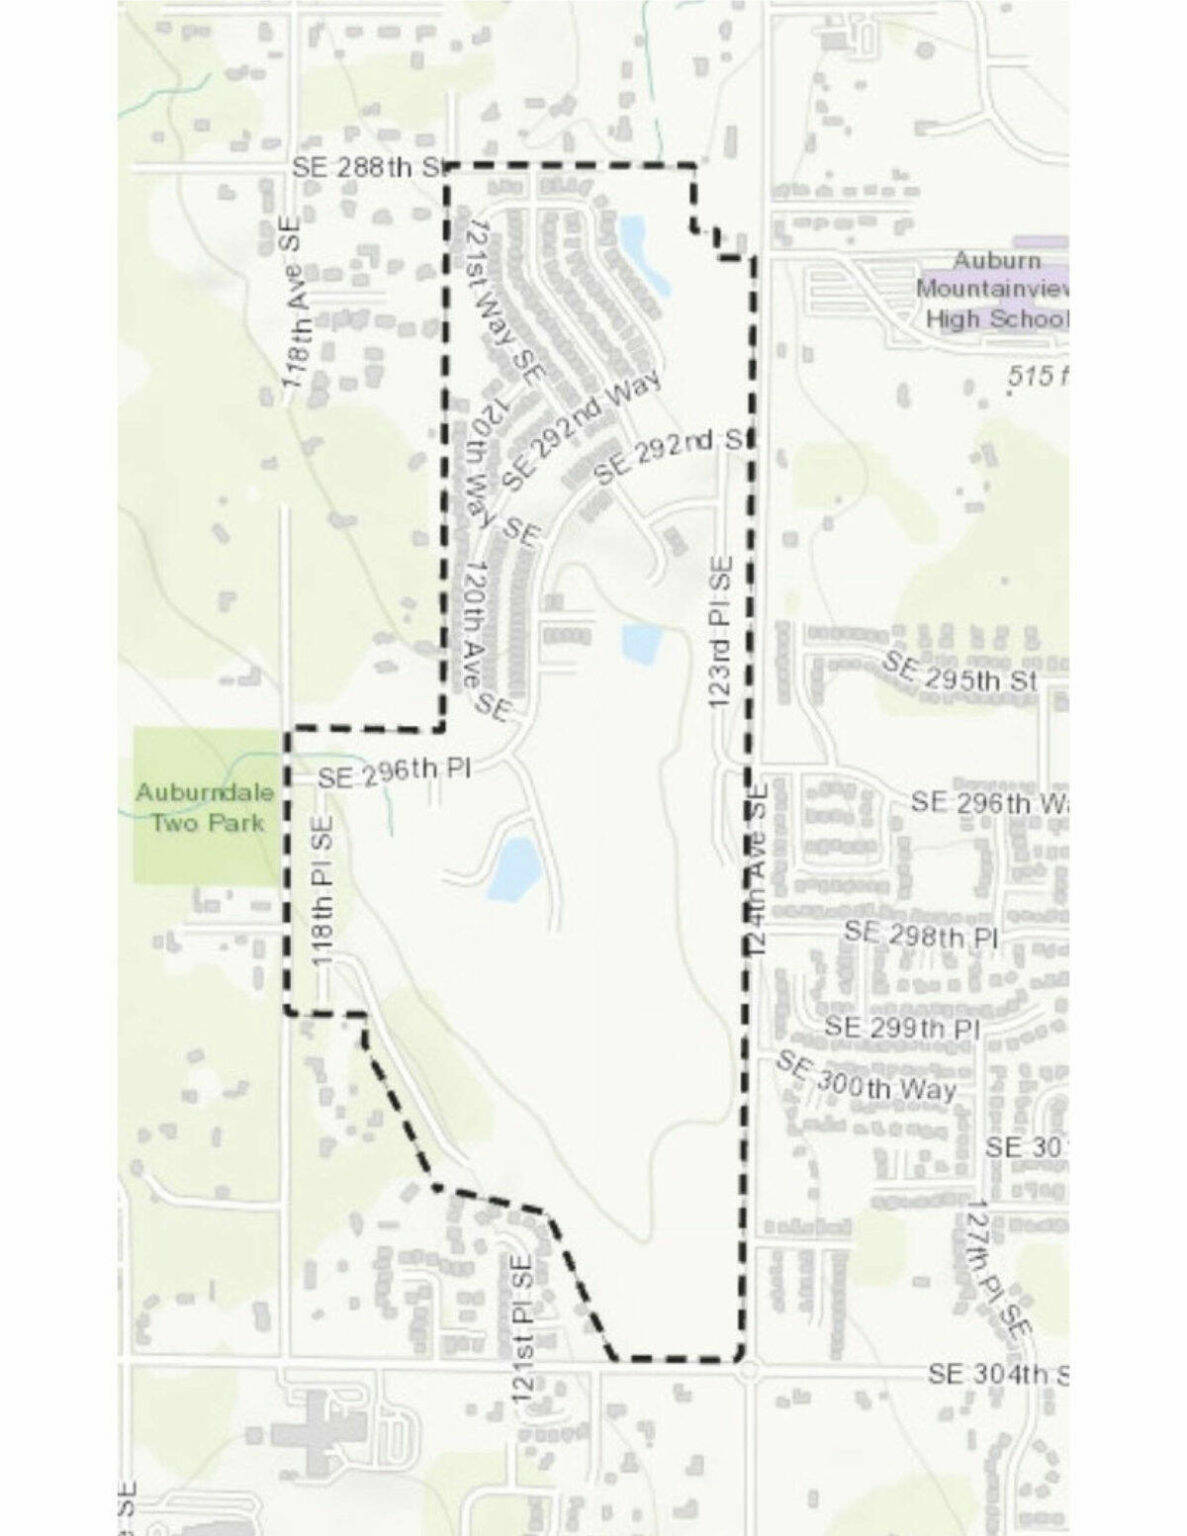 A map of the Bridges neighborhood in Kent, surrounded by property owned by the city of Auburn. COURTESY GRAPHIC, City of Kent